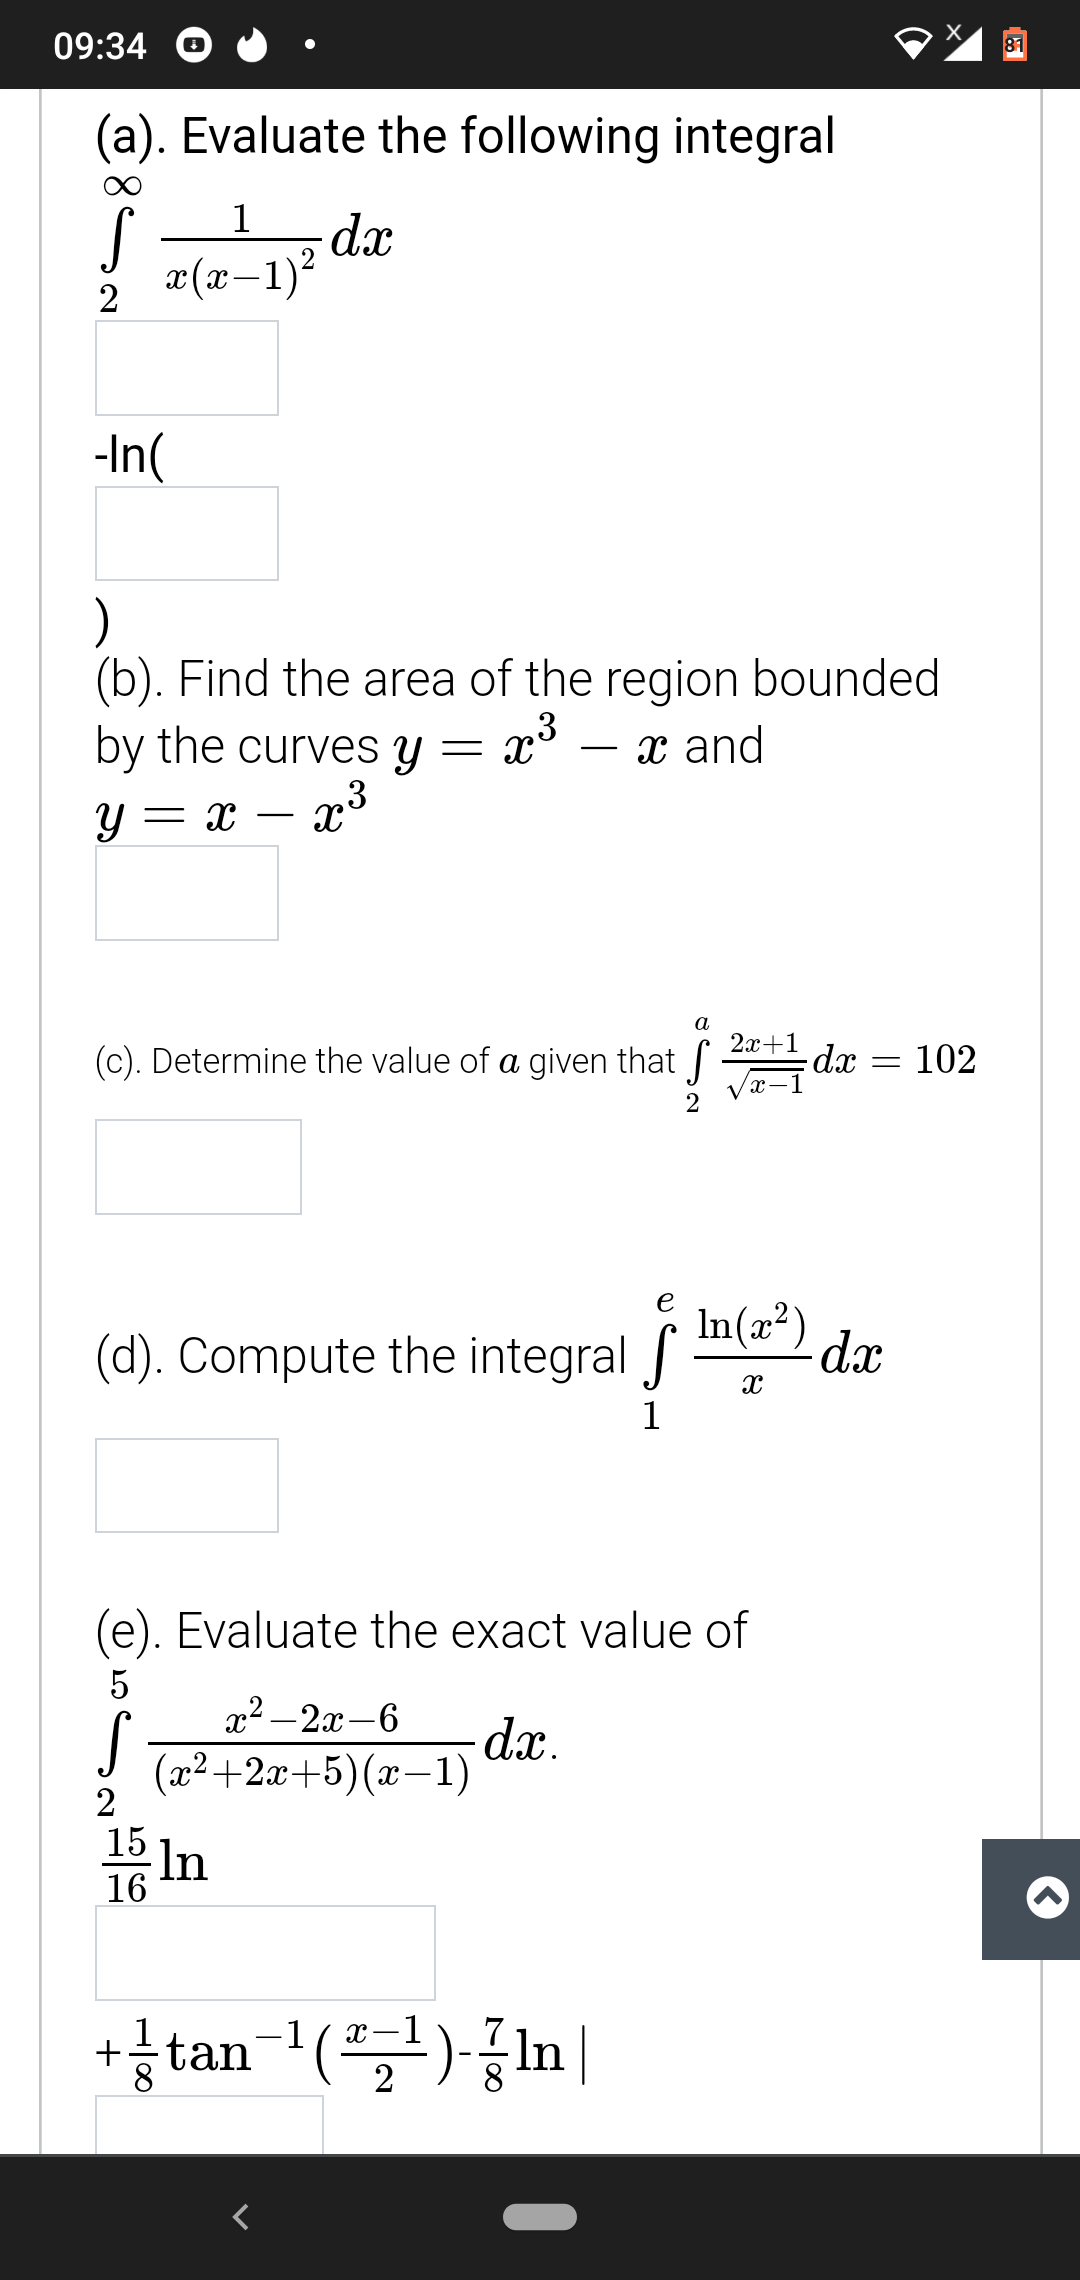 09:34
81
(a). Evaluate the following integral
1
dx
x(x-1)?
-In(
(b). Find the area of the region bounded
by the curves y = x° – x and
y = x – x³
х and
-
a
2х+1
(c). Determine the value of a given that
dx =
102
In(a²) dx
e
(d). Compute the integral f
1
(e). Evaluate the exact value of
x² – 2x-6
(x2+2x+5)(x–
2
dx.
-1)
15
In
16
+ tan-1(골)-공1n
2
